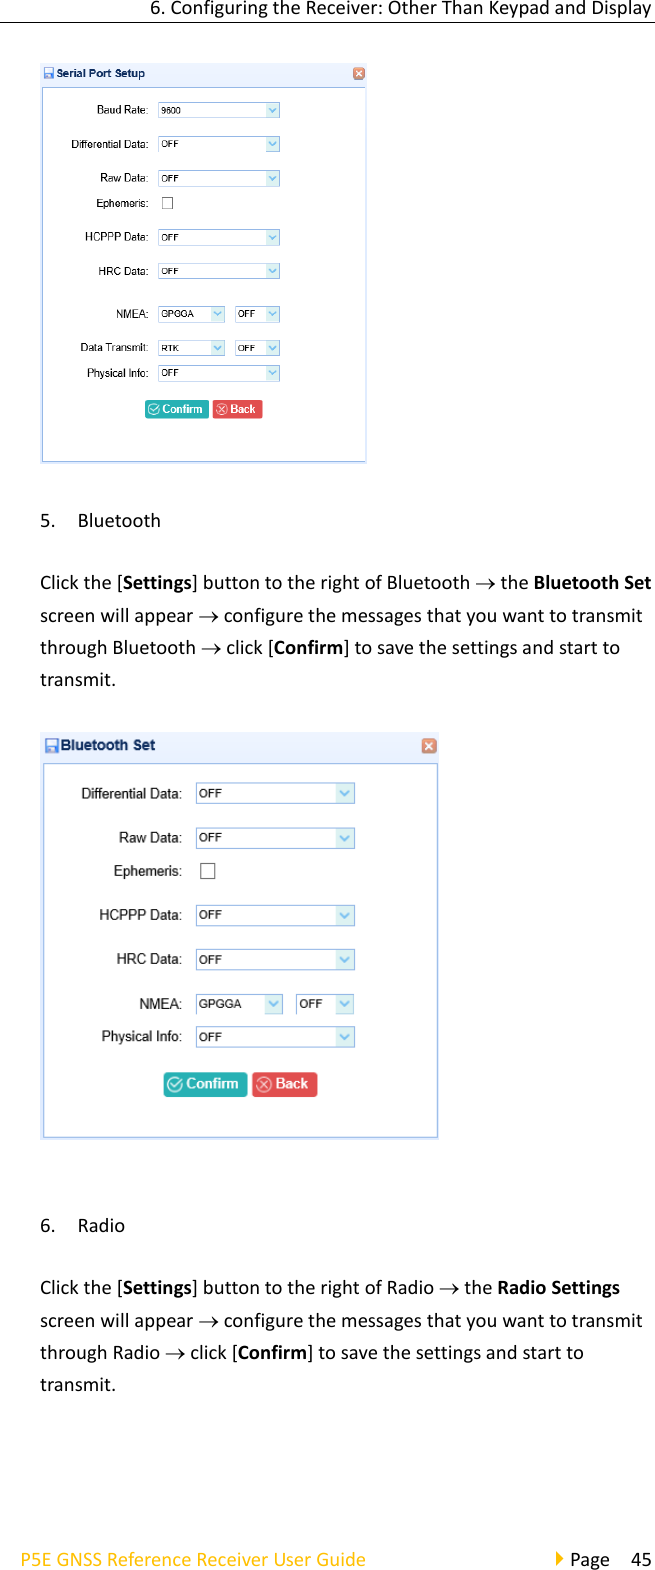 6. Configuring the Receiver: Other Than Keypad and Display P5E GNSS Reference Receiver User Guide                                     Page  45  5. Bluetooth Click the [Settings] button to the right of Bluetooth  the Bluetooth Set screen will appear  configure the messages that you want to transmit through Bluetooth  click [Confirm] to save the settings and start to transmit.   6. Radio Click the [Settings] button to the right of Radio  the Radio Settings screen will appear  configure the messages that you want to transmit through Radio  click [Confirm] to save the settings and start to transmit. 